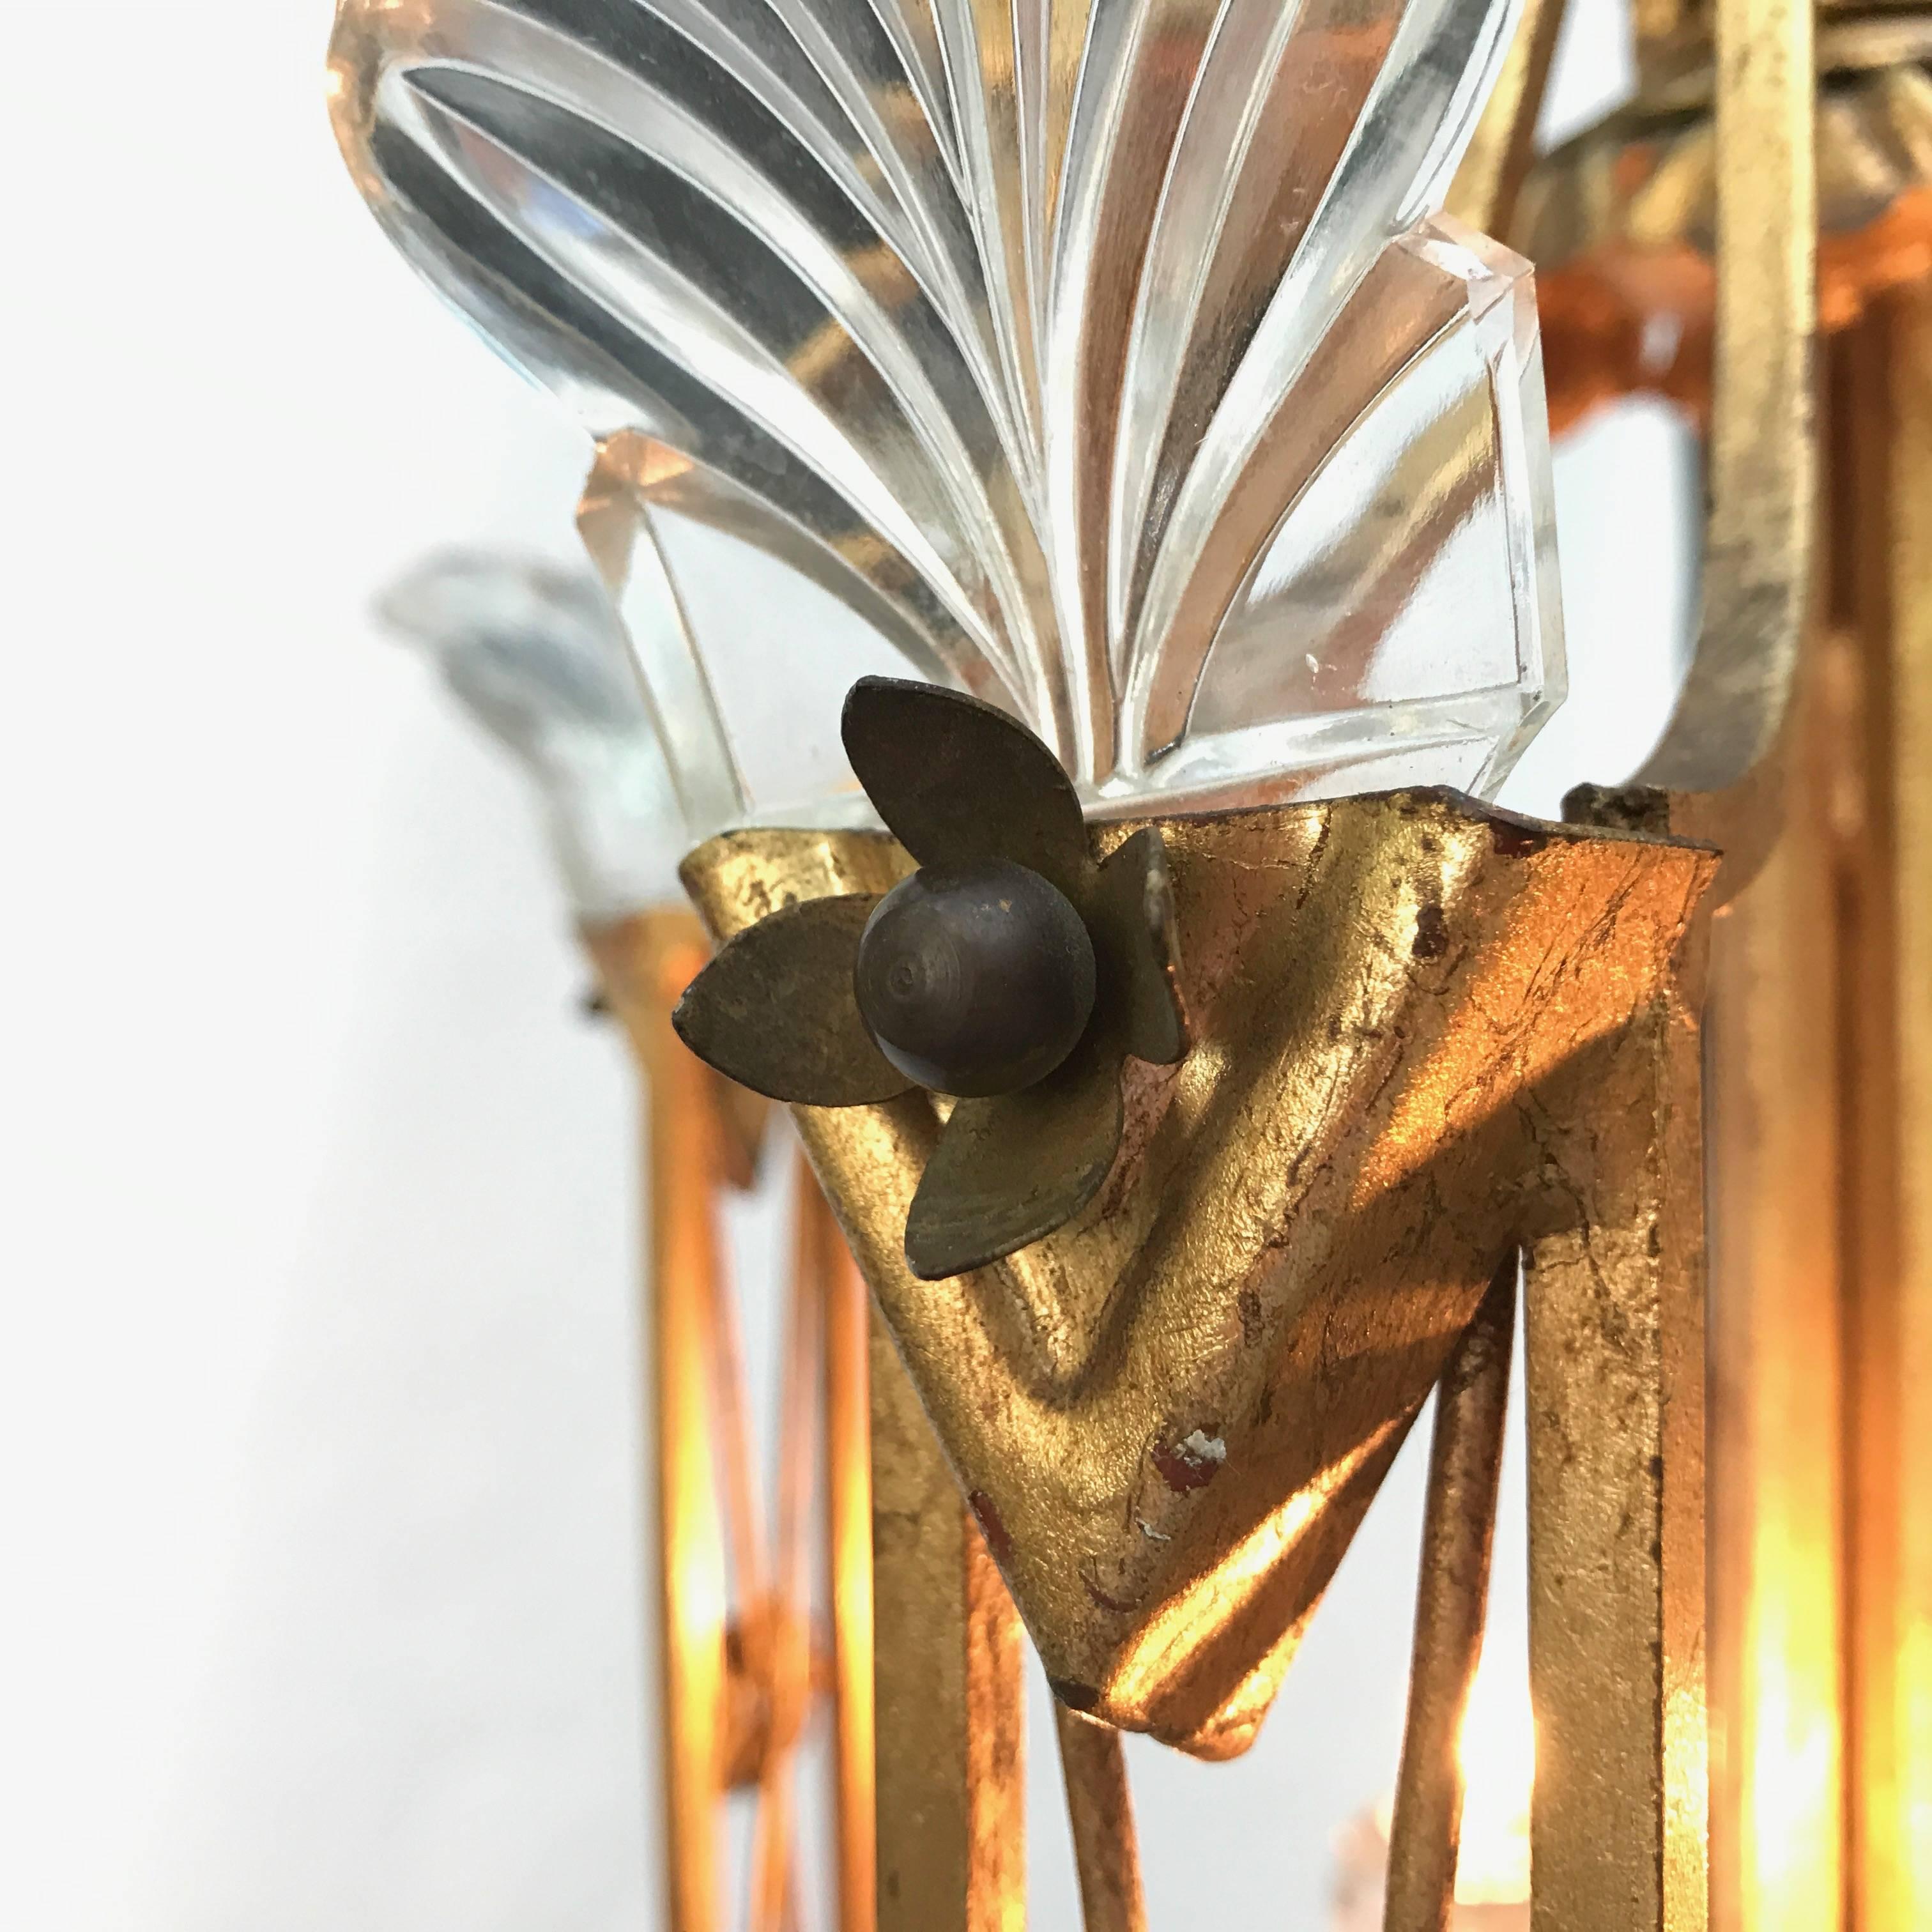 Vintage Italian lantern with a cage shaped leaf-gilded iron structure decorated with crystal elements, leaves and geometrical patterns made by Banci manufacture in Florence, circa 1980s.
Four curved arms ending with E14 light bulbs for a max power